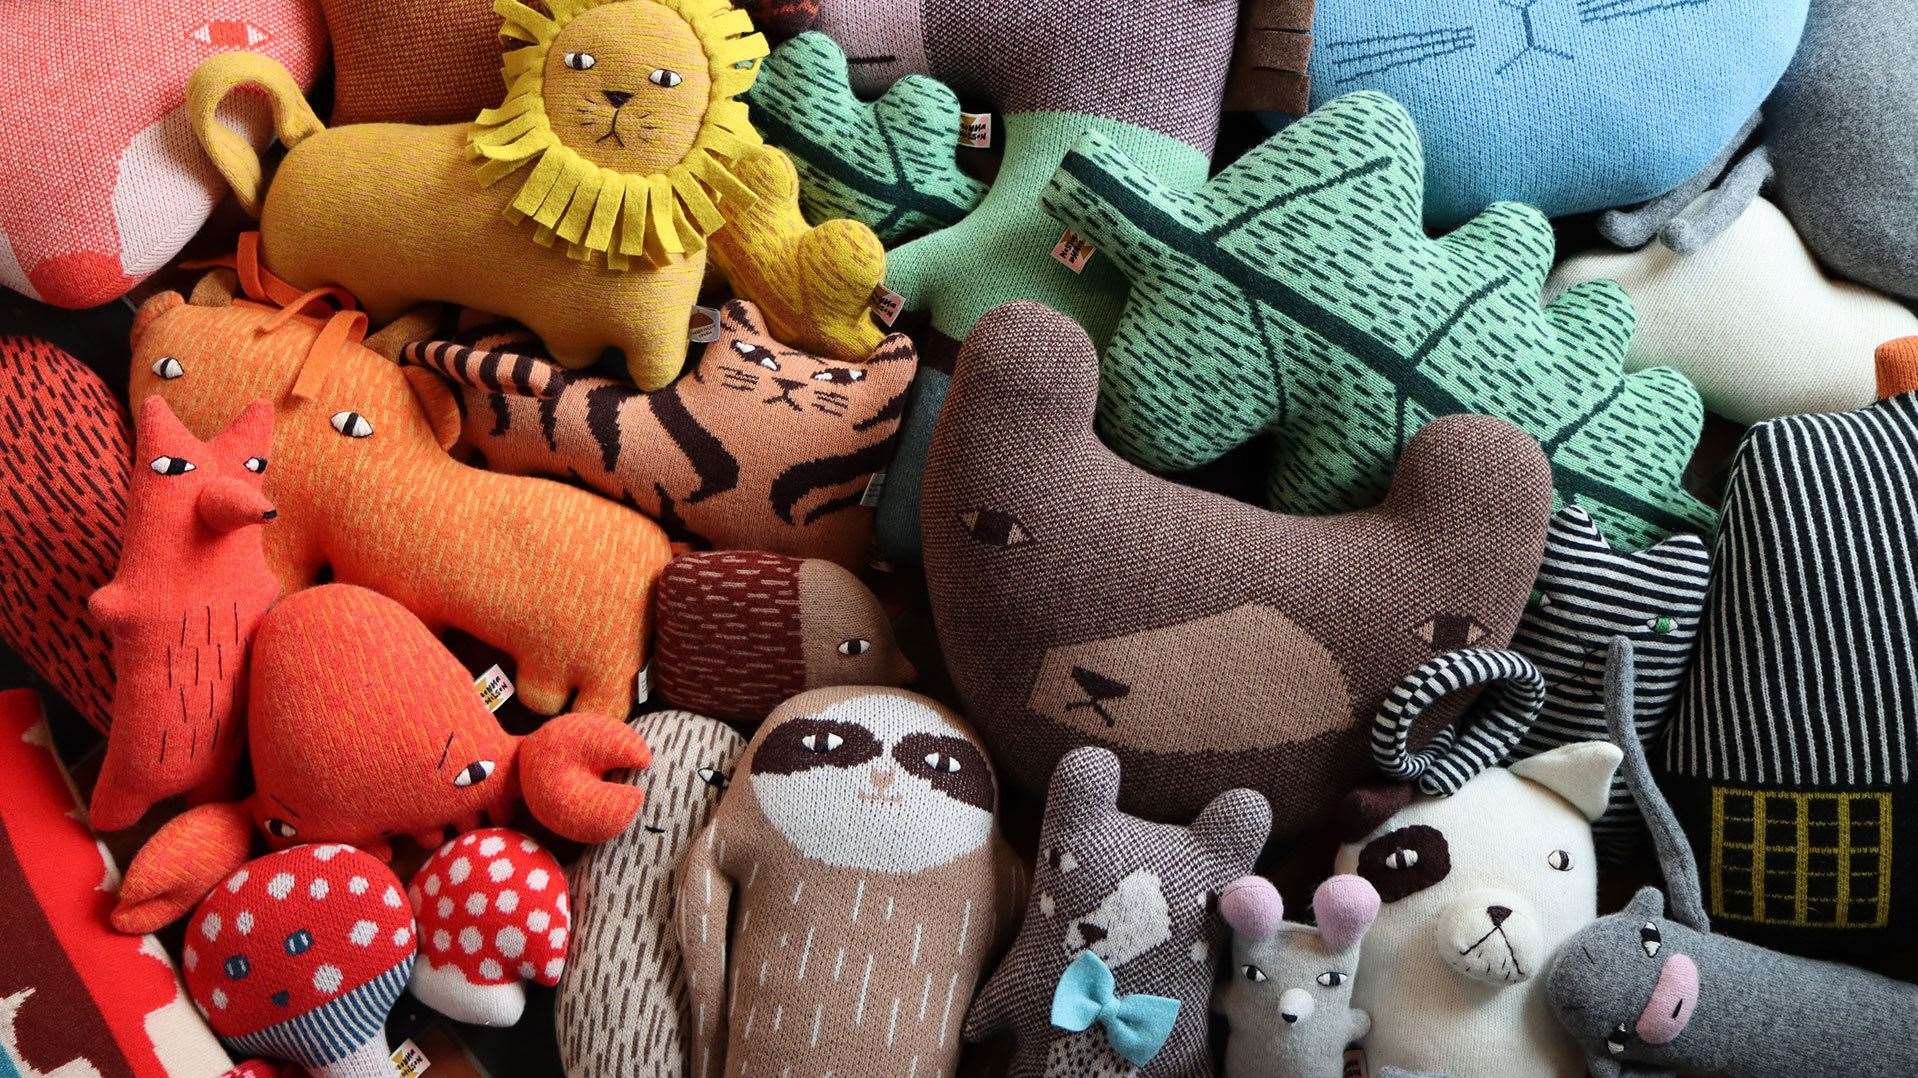 Donna Wilson is known for her knitted creatures.